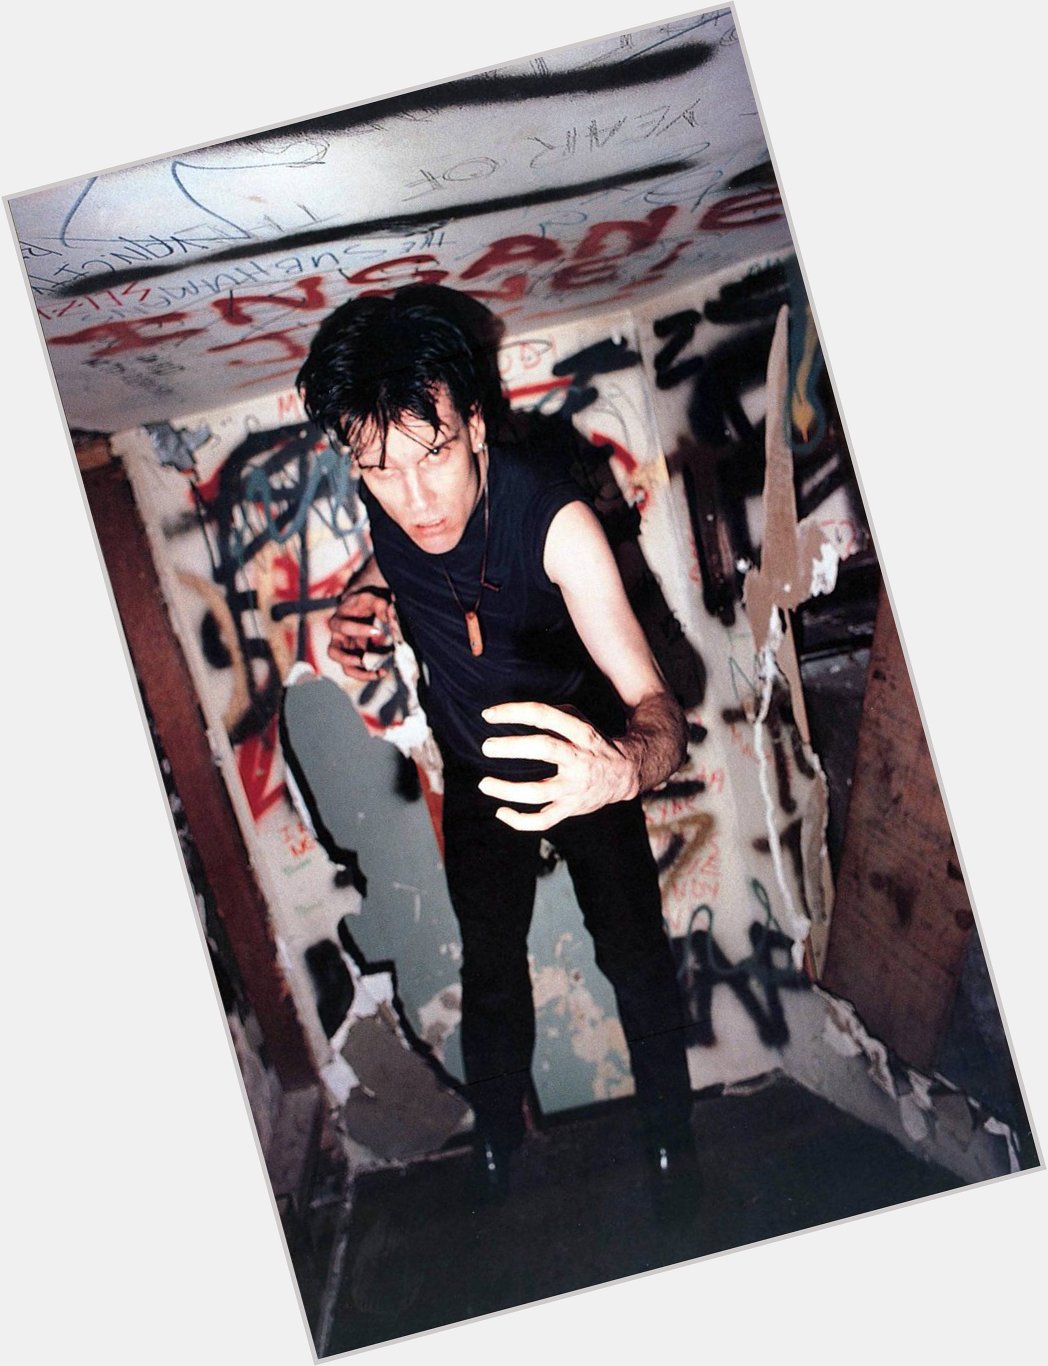 Happy Birthday to the Rock n Roll Daddy who done passed on. Lux Interior would be 73 today. 